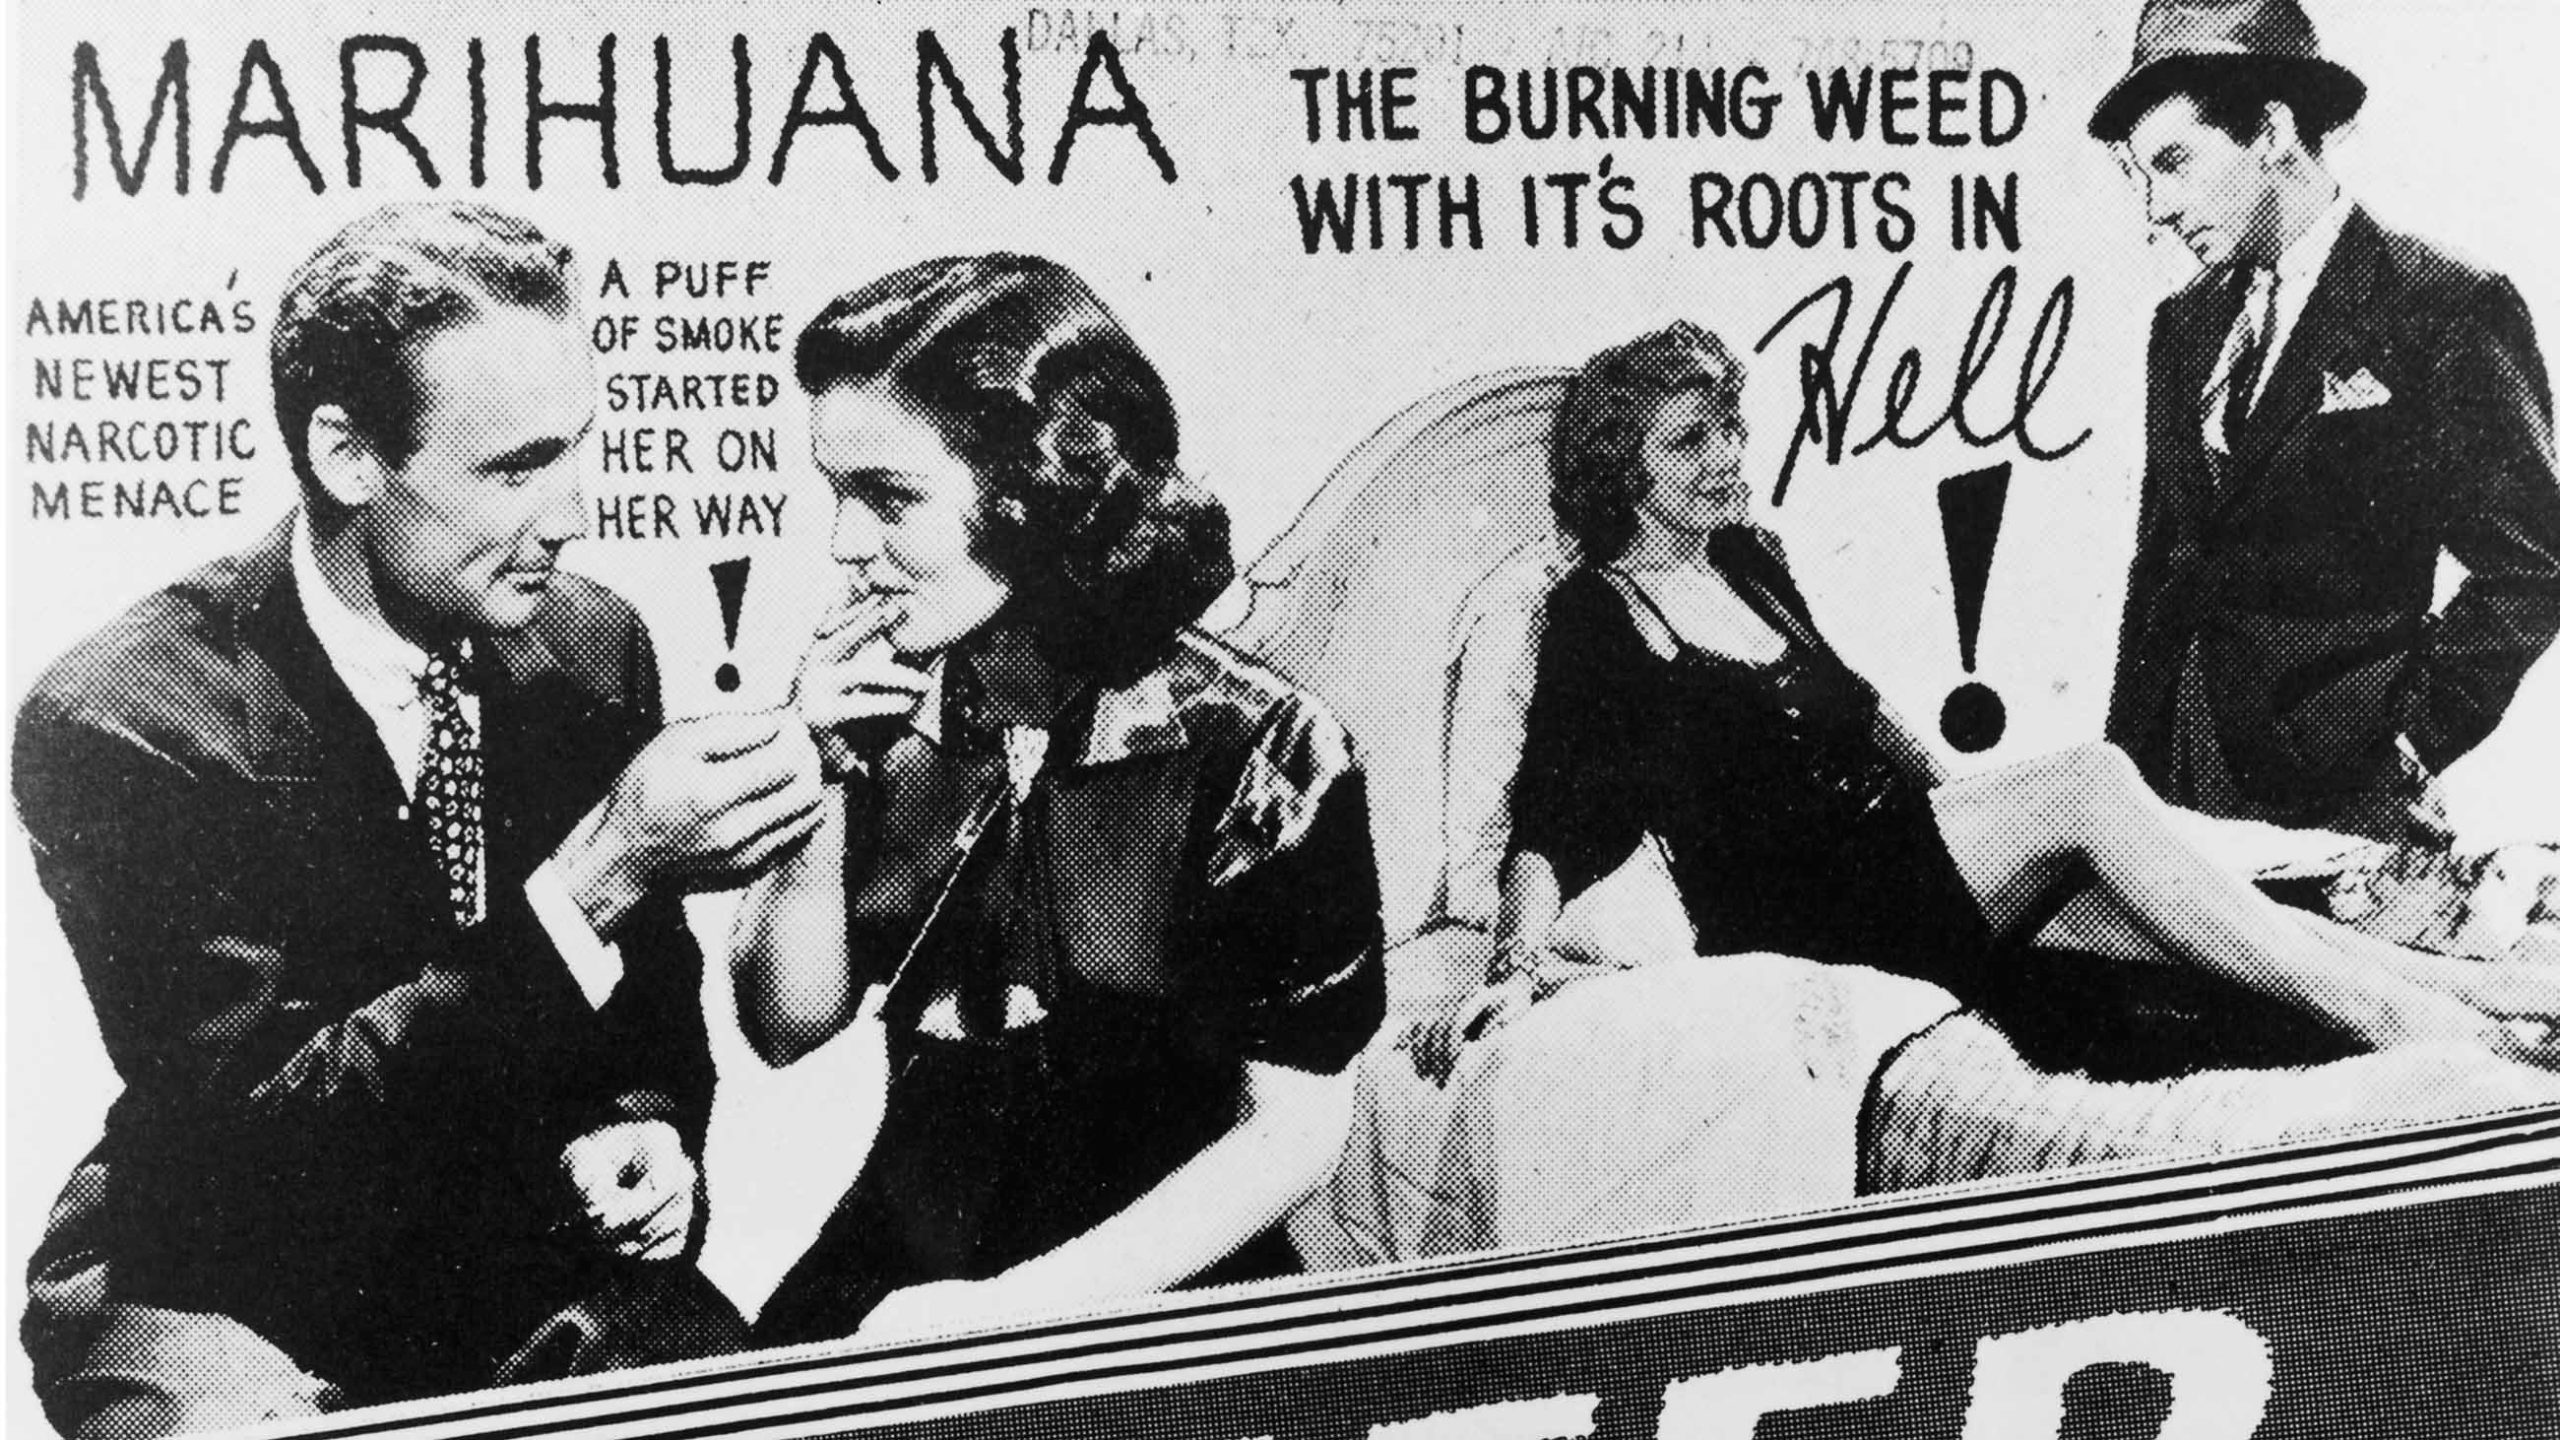 Reefer Madness photo 1930s Motion Picture Ad truck Perils of Marijuana Usage